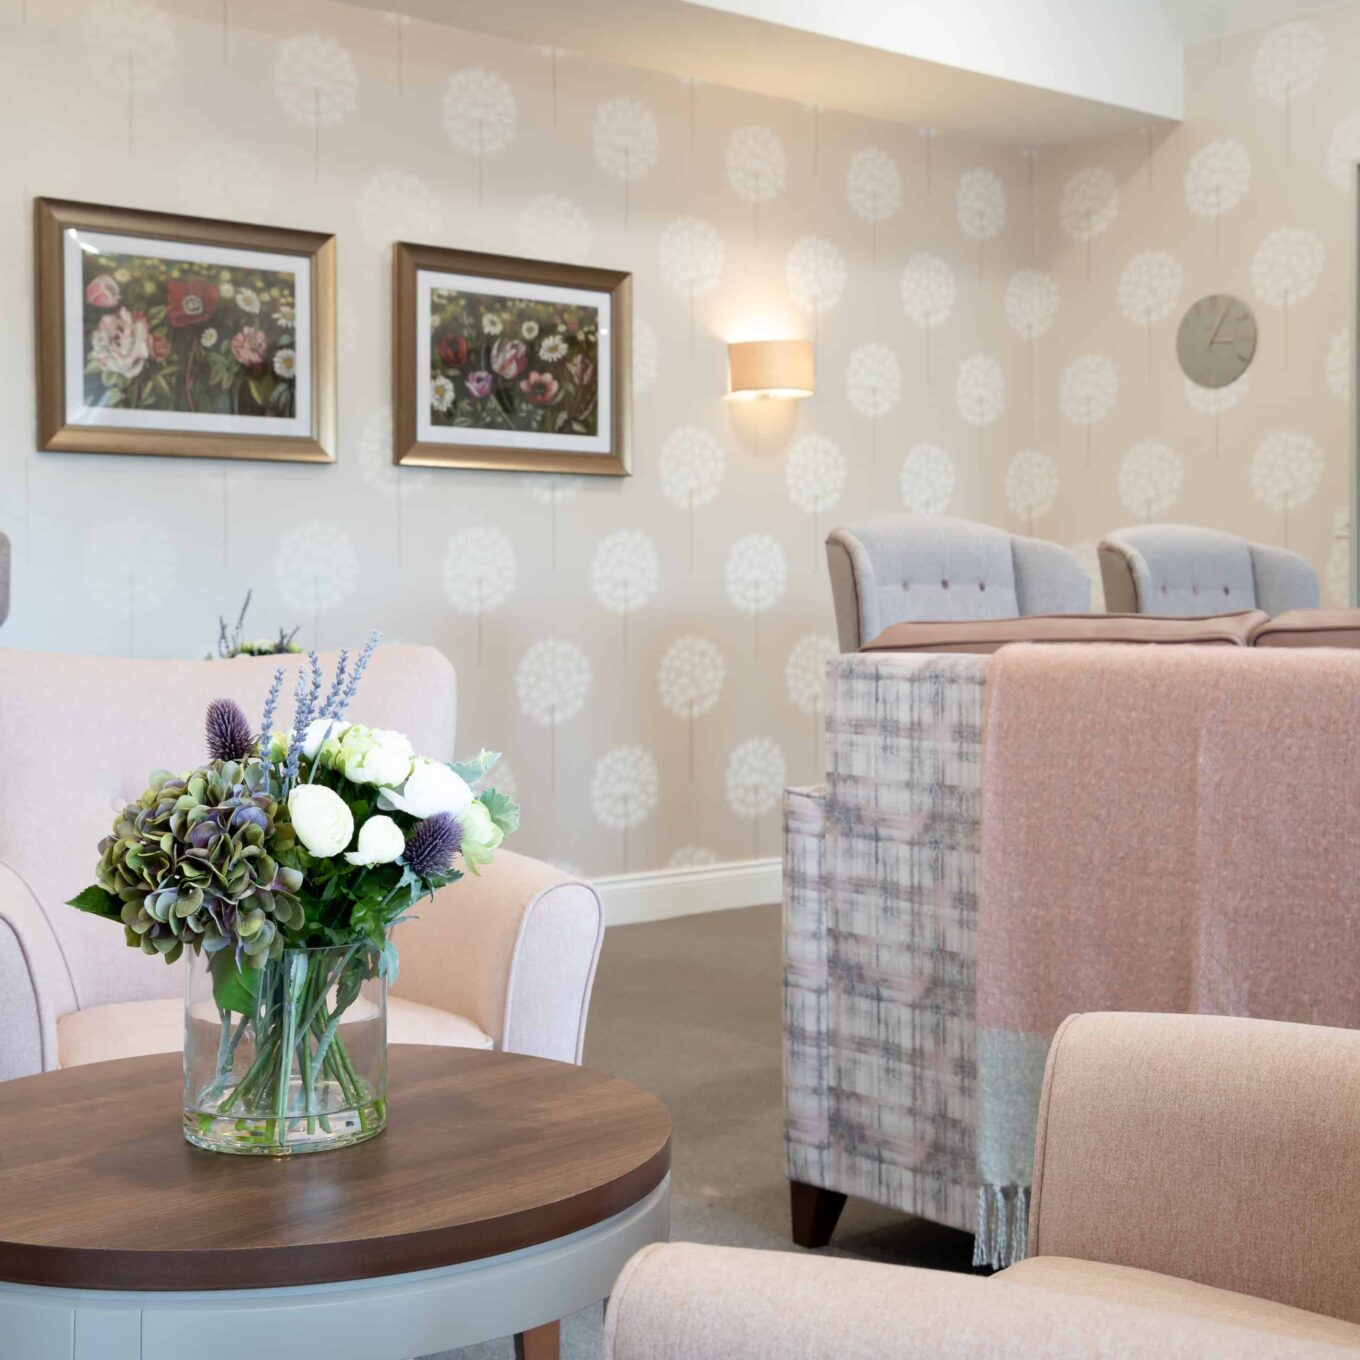 Seating area with flowers on table at Elmbrook Court Care Home in Wantage